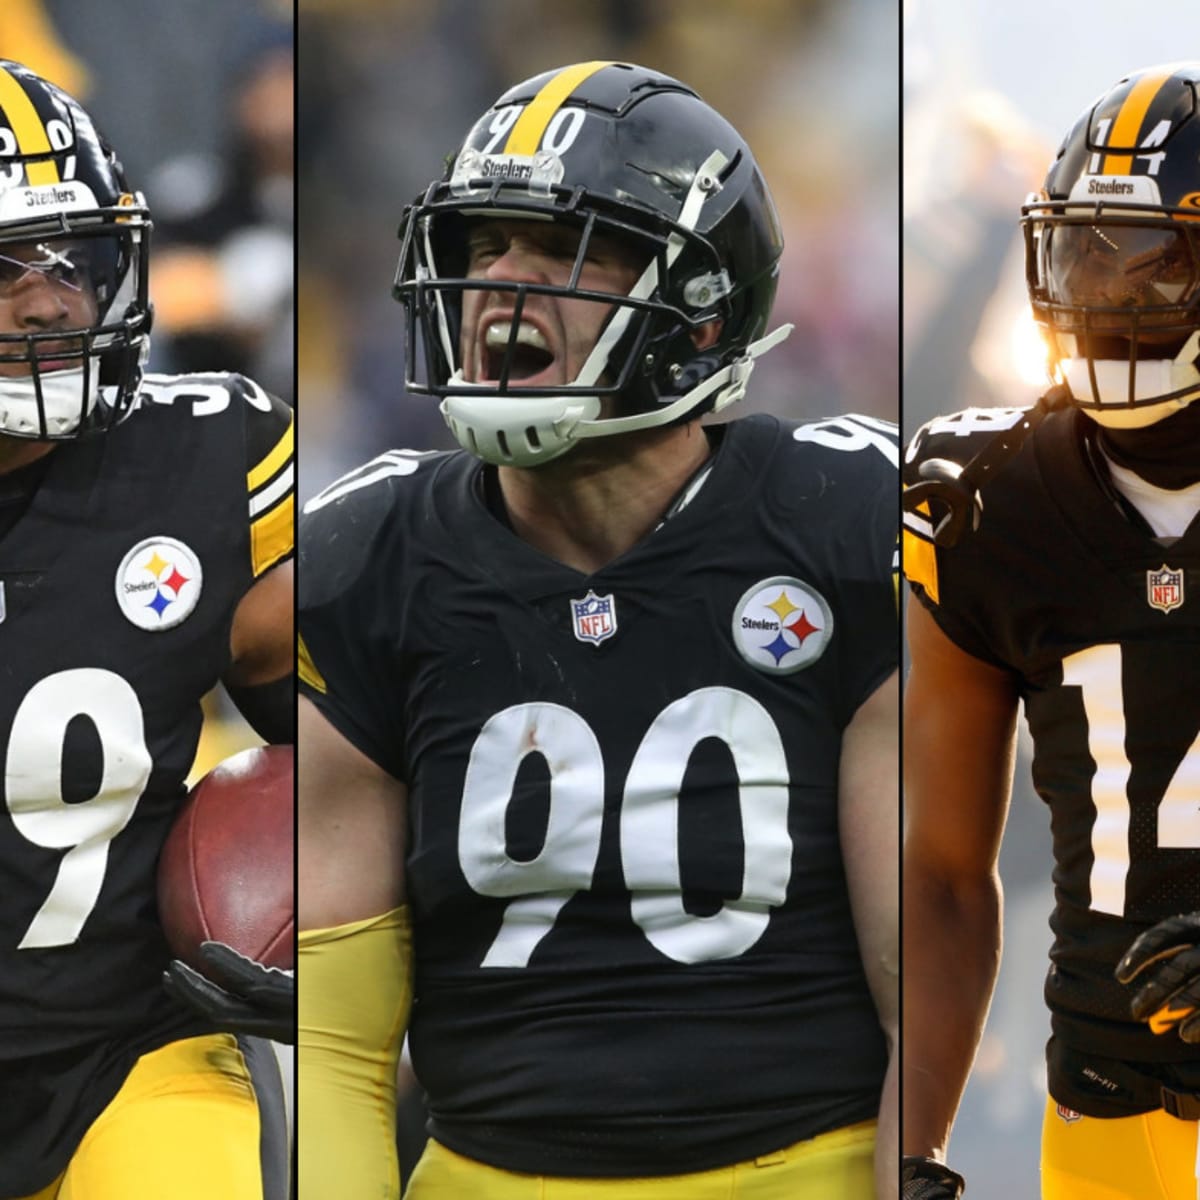 Ranking the Steelers 7 best defensive players from 2022